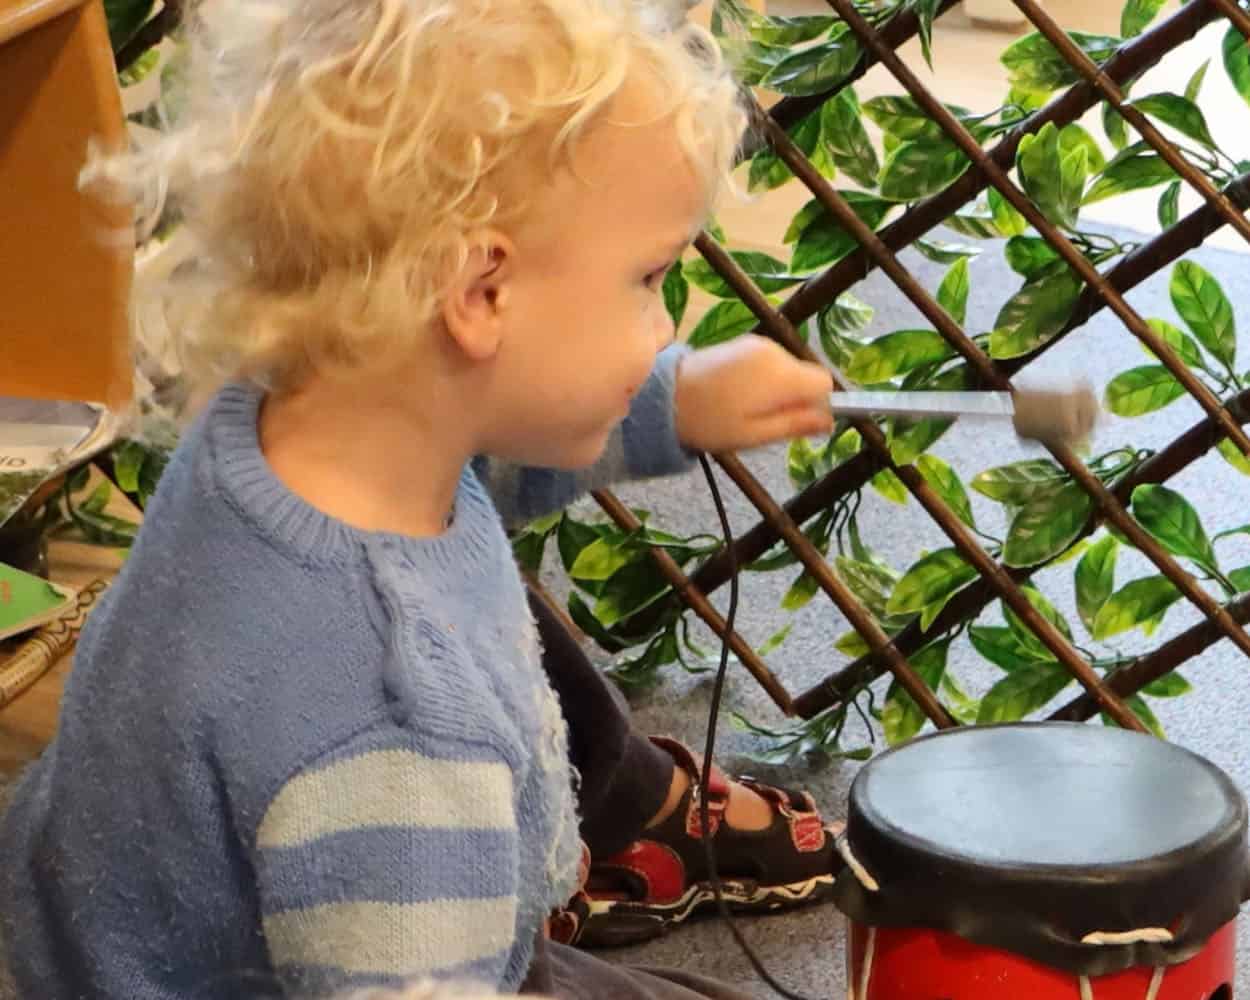 Daycare toddler is banging a drum - listen to me!